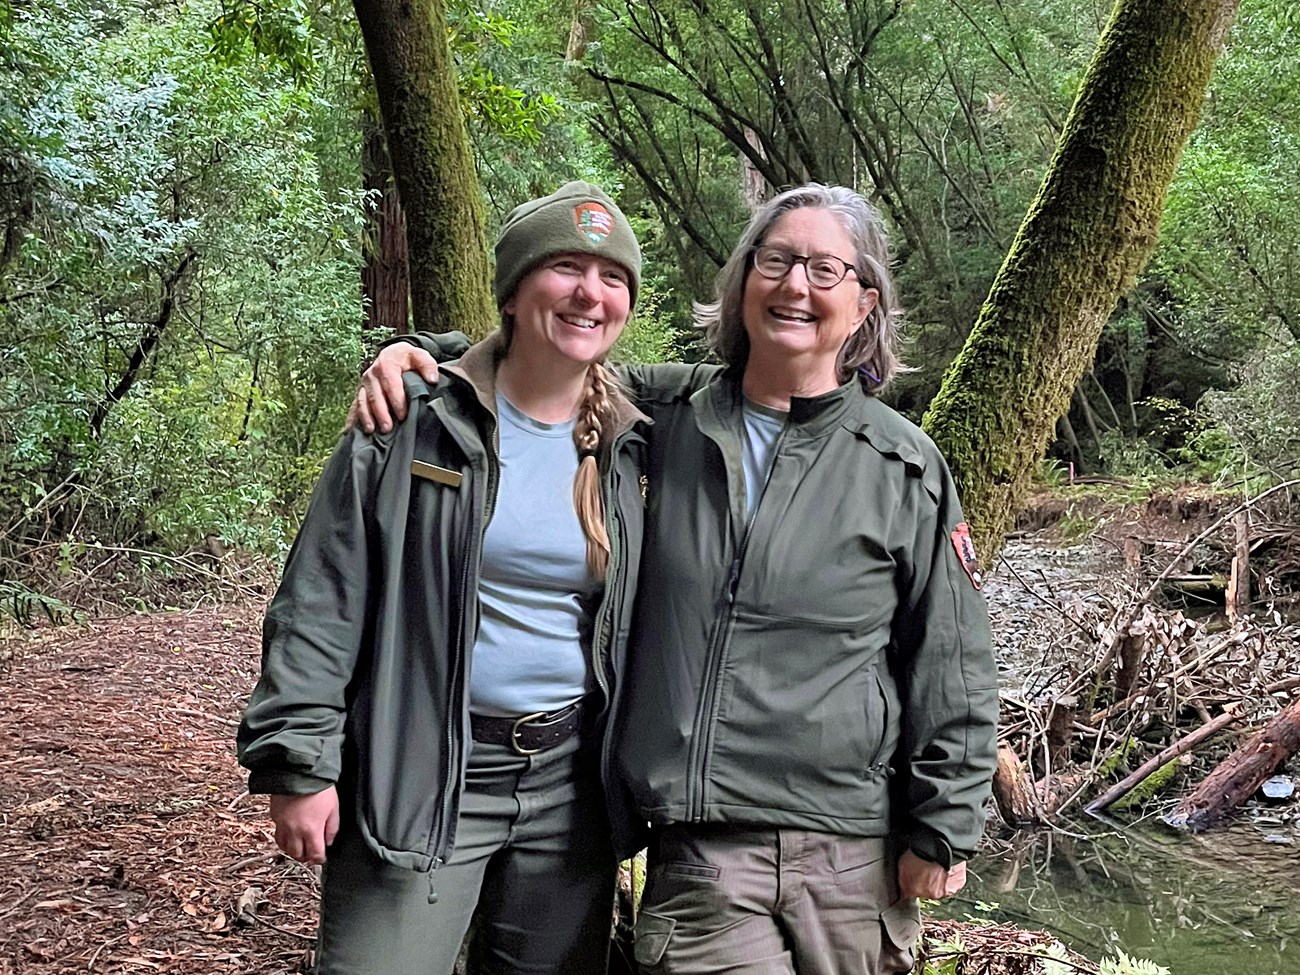 Two women wearing National Park Service jackets smile as they stand side-by-side in a forest beside the clear, calm water of Redwood Creek.